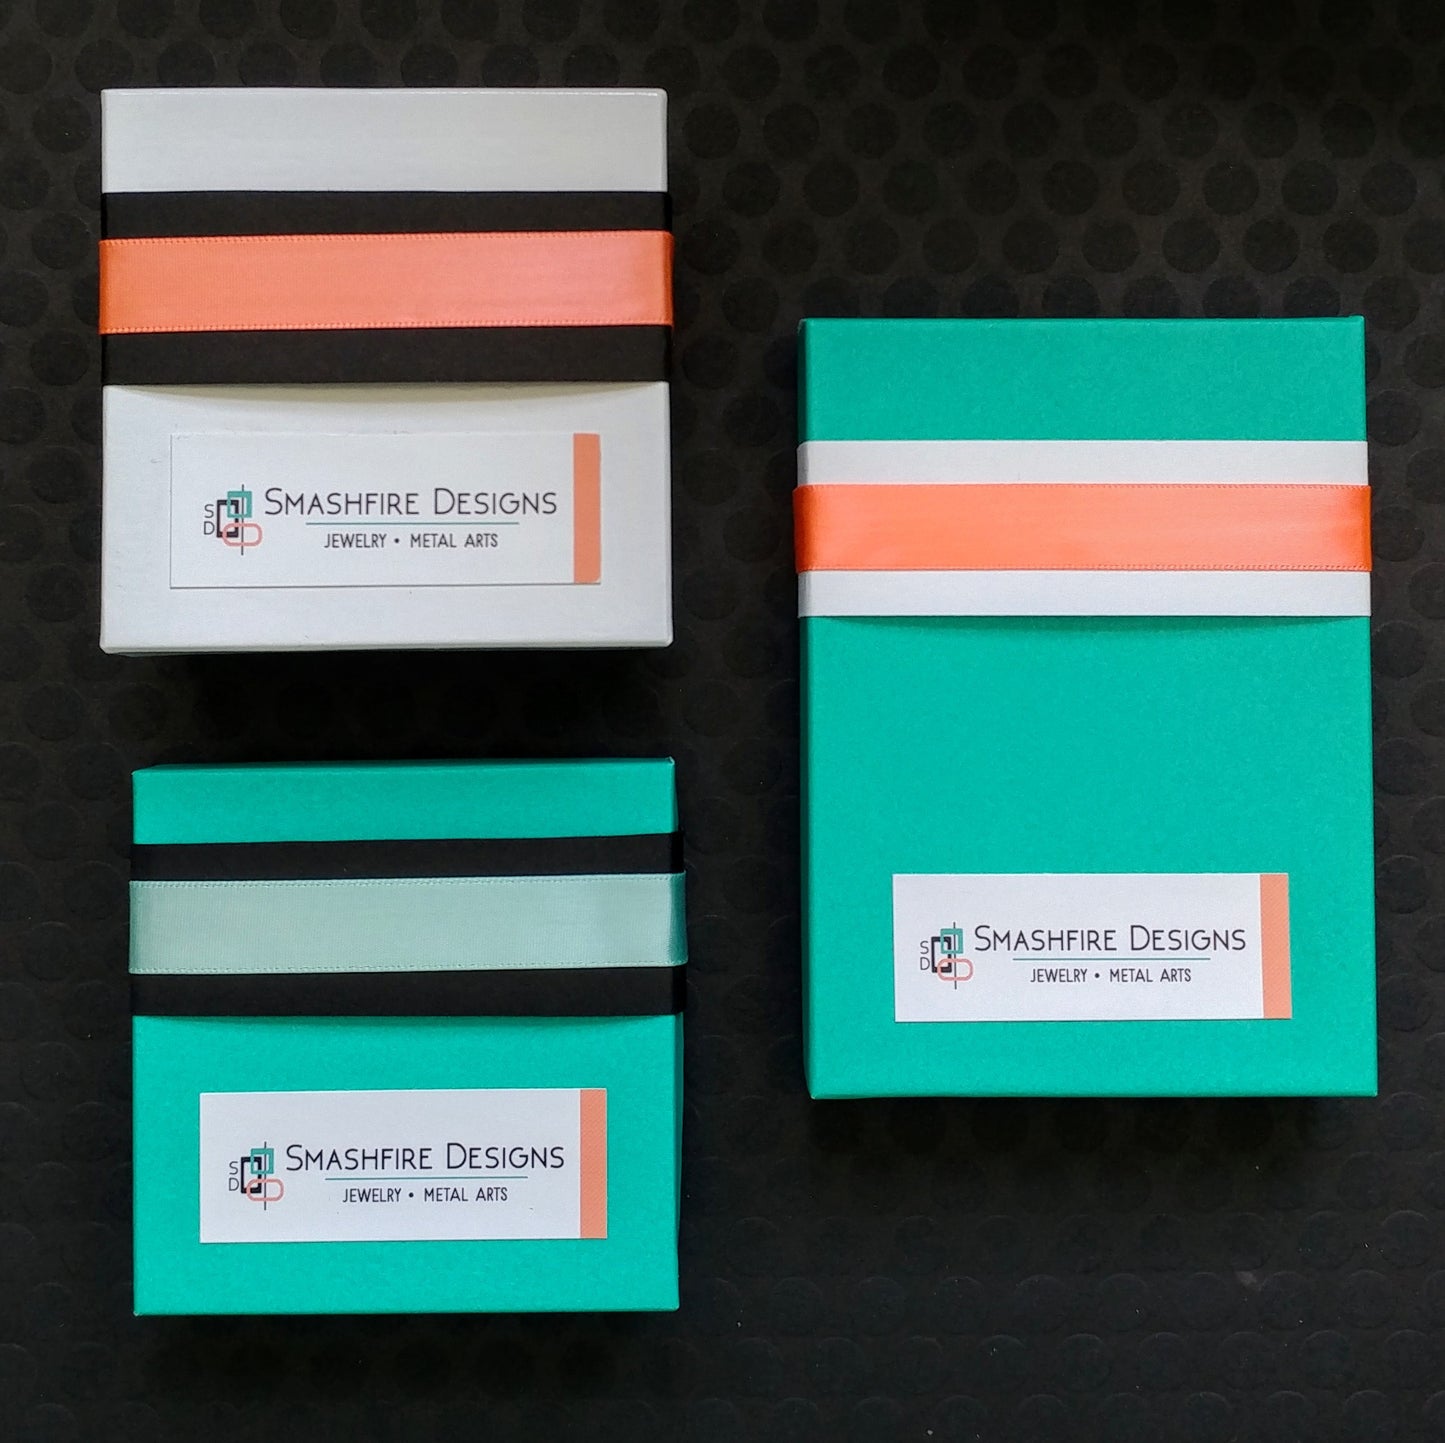 Teal and coral colored modernist packaging by Smashfire Designs.